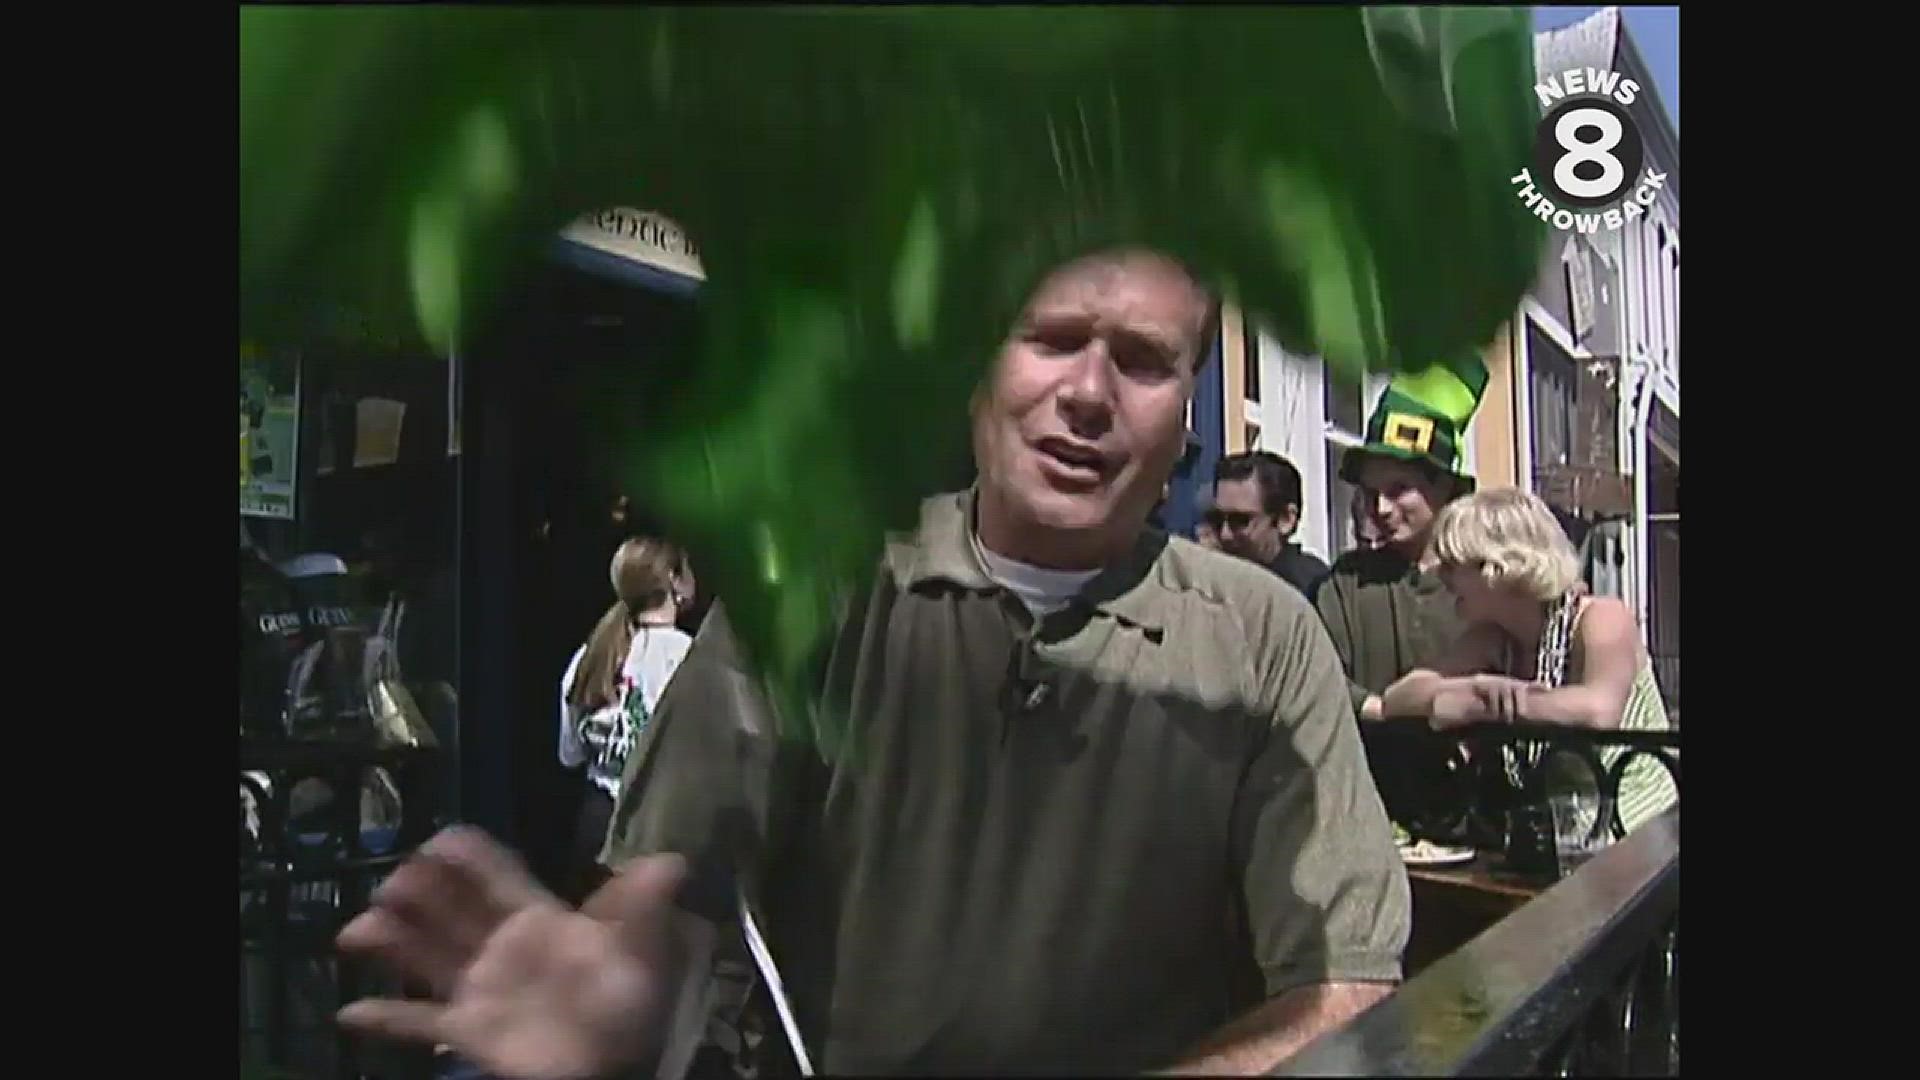 News 8's Larry Himmel shared some fun St. Patrick's Day trivia from outside The Field Irish Pub in San Diego in 2004. See more St. Patrick's Day shenanigans.